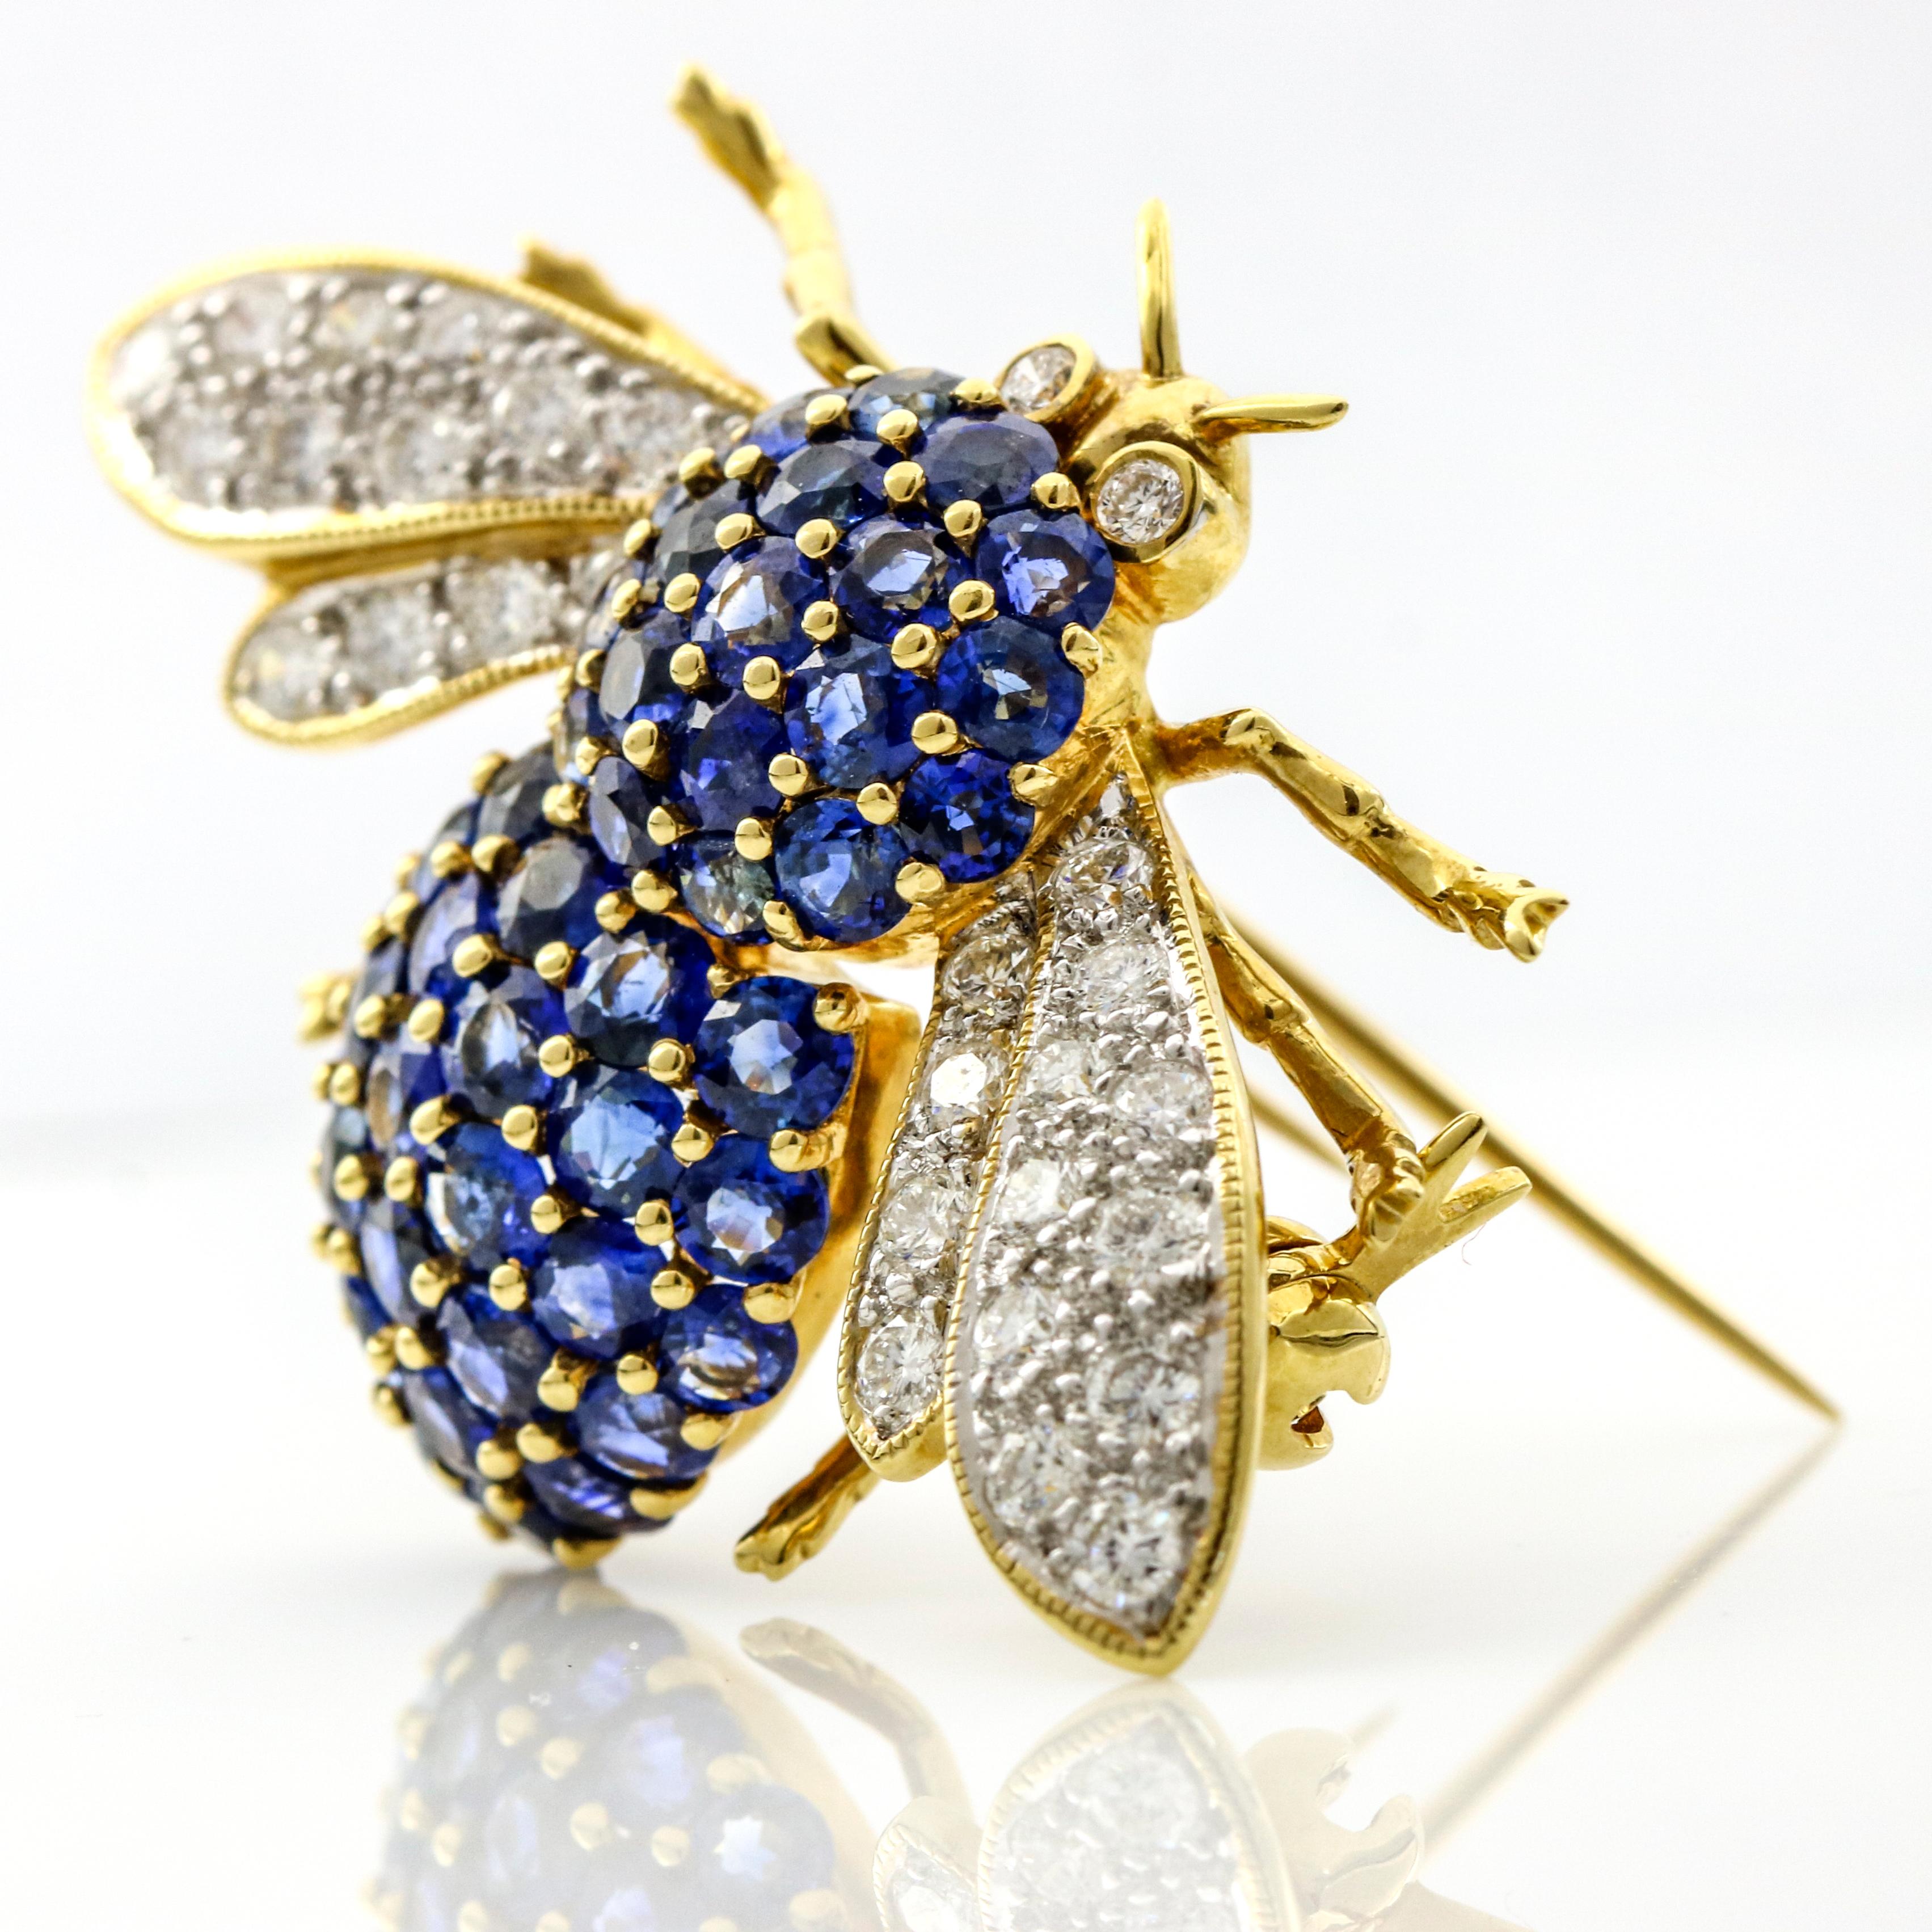 Bee brooch in 18-karat yellow gold with blue sapphires and diamonds. The bee body is prong-set with 46 round-cut natural sapphires, the wings are pave set with numerous near colorless diamonds and the eyes are accented with 2 bezel set round